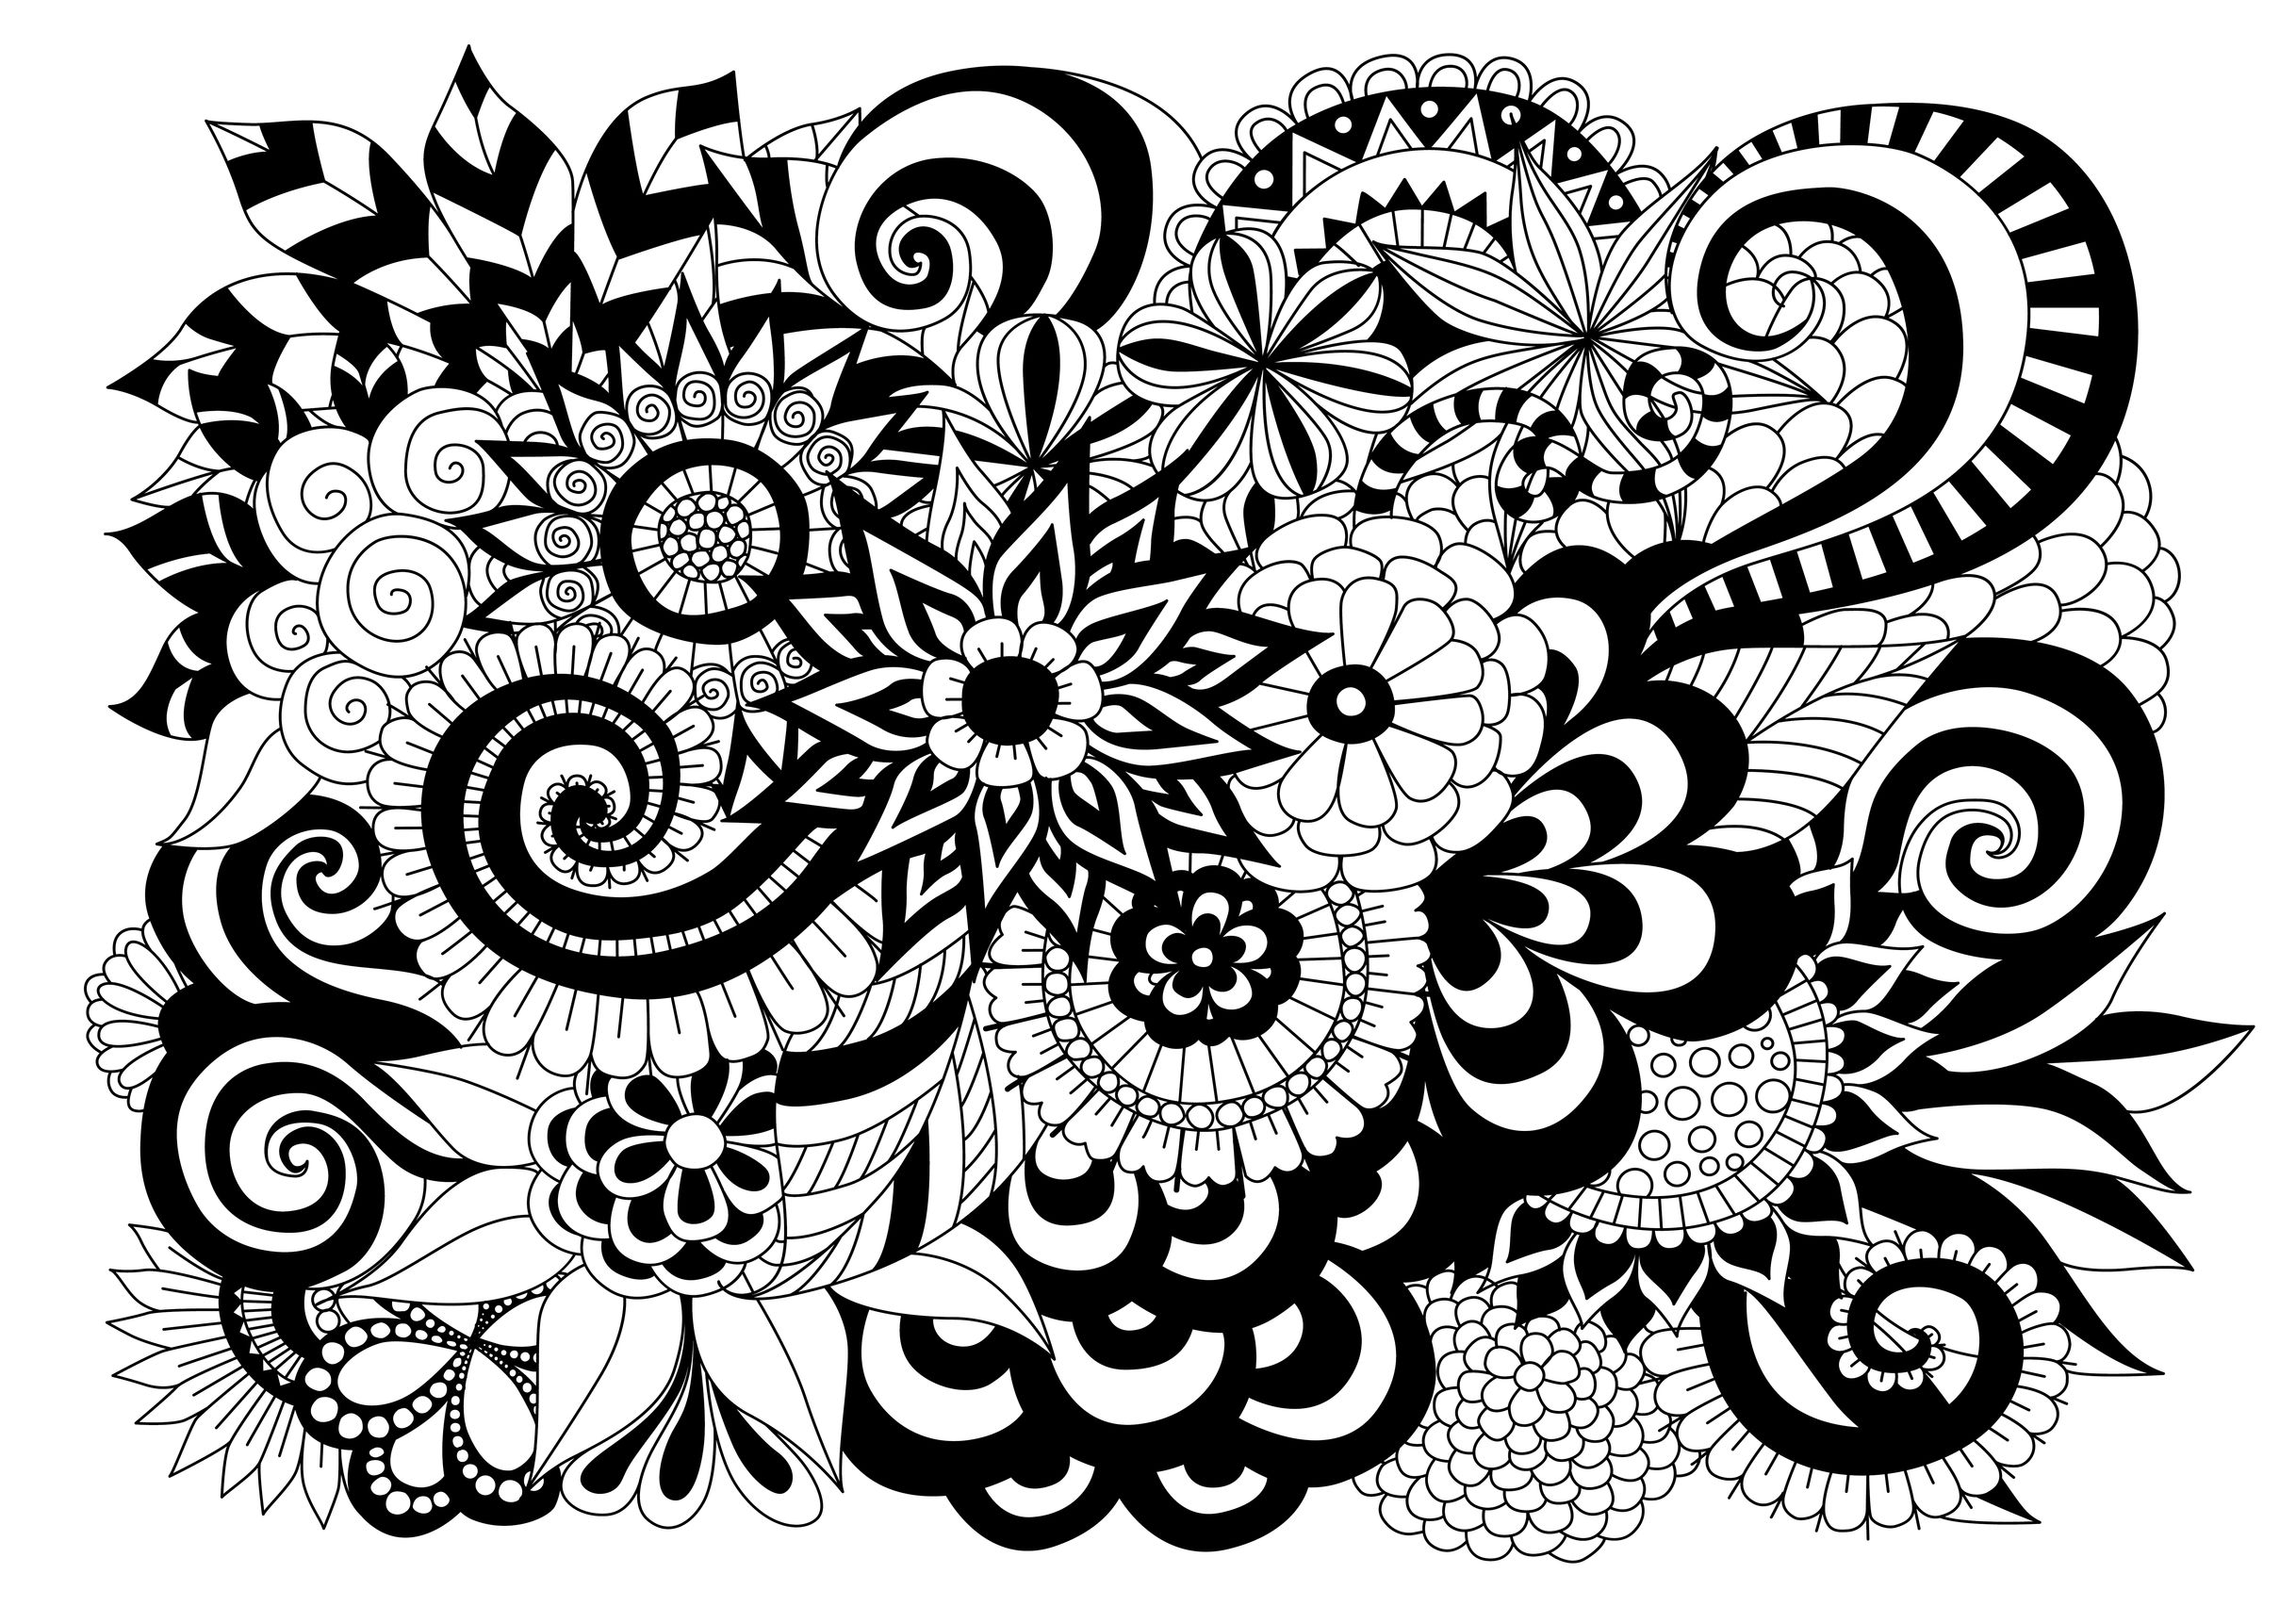 Magnificent and very contrasted adult coloring page, representing numerous flowers and leaves, Artist : Bimdeedee   Source : 123rf